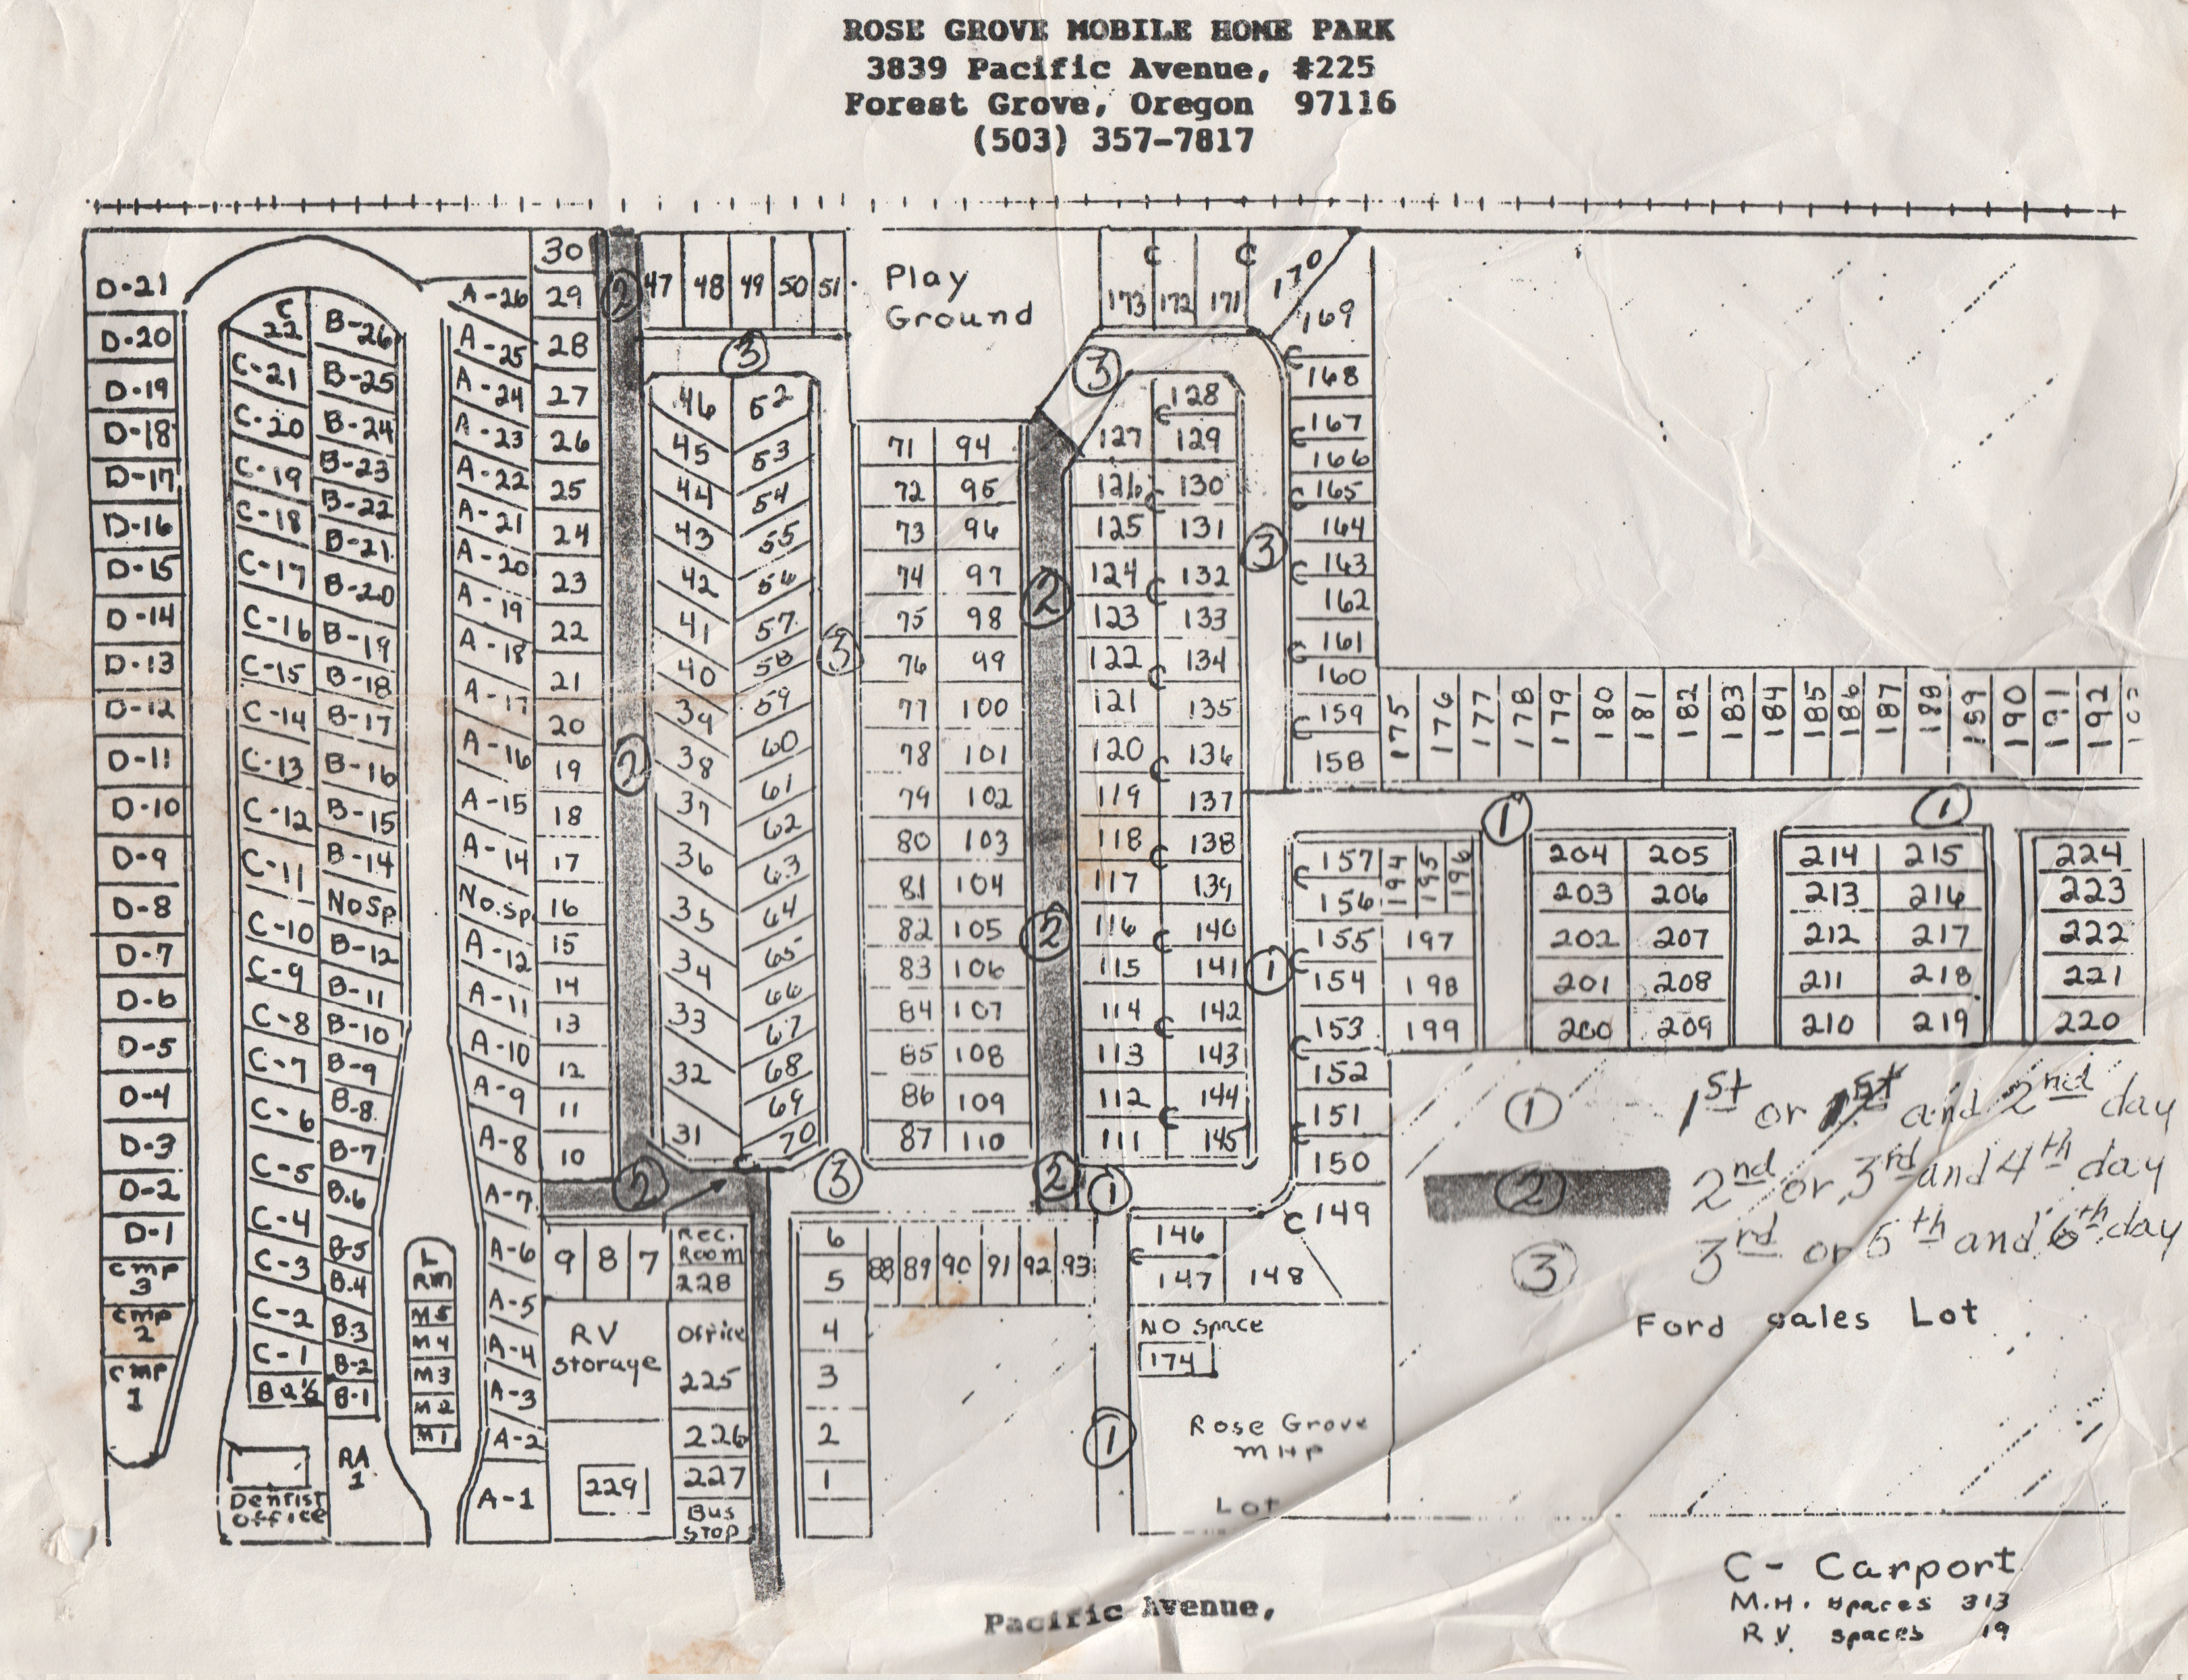 1990's maybe - Rose Grove Mobile Home Park Map.jpg